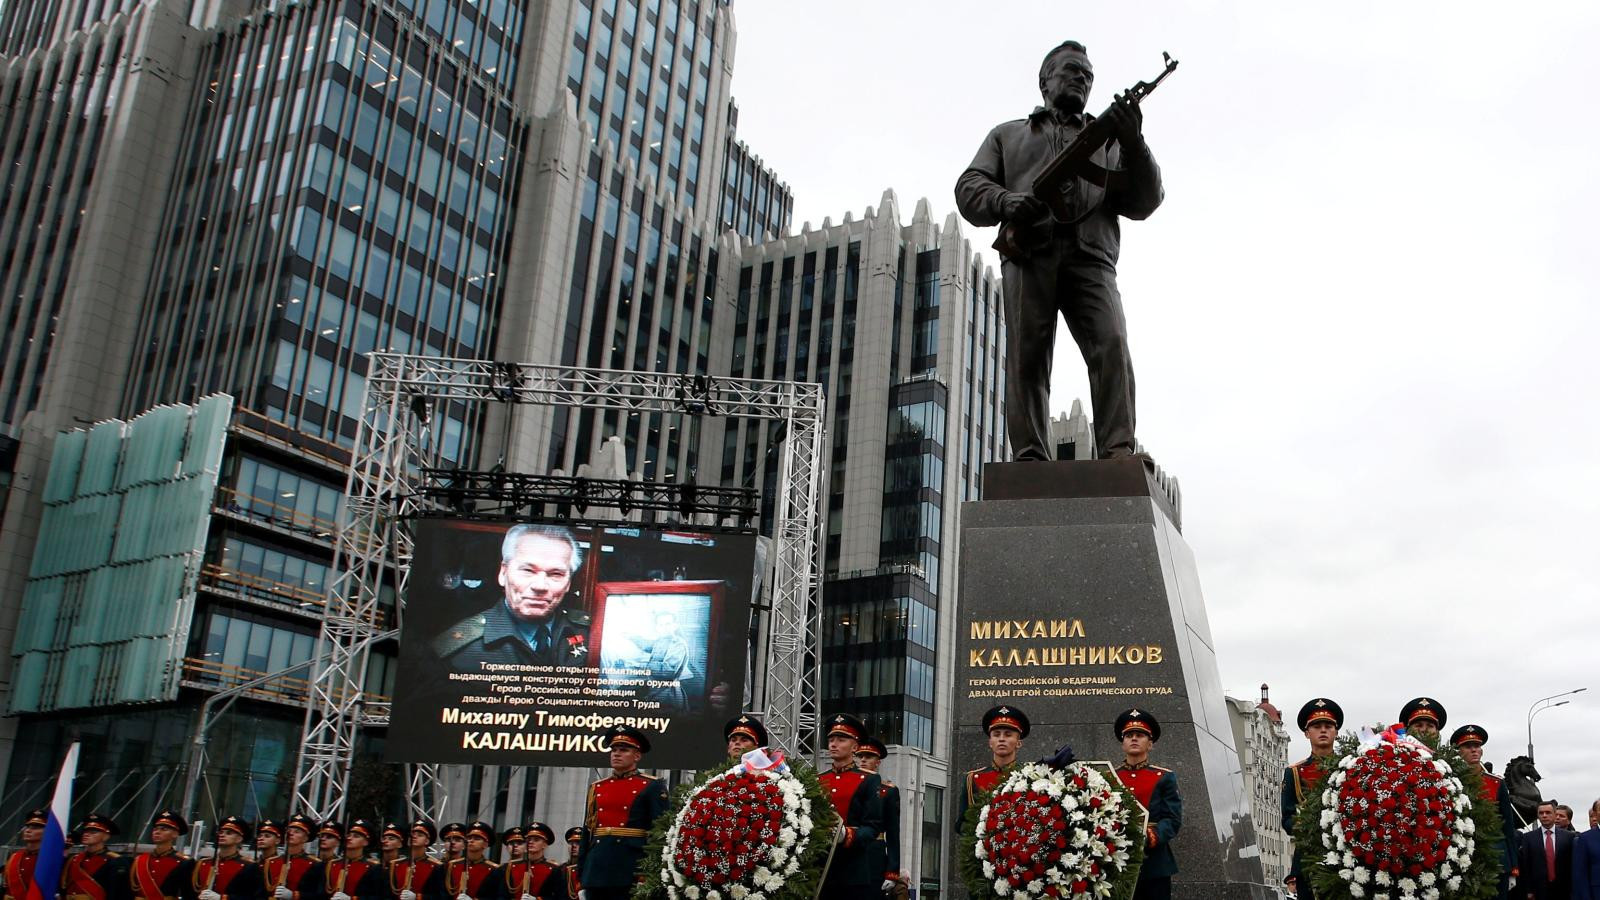 Salavat Shcherbakov's best-known work so far is a monument he designed in honour of Mikhail Kalashnikov, inventor of the AK-47 gun, and which is located in Moscow ©Getty Images